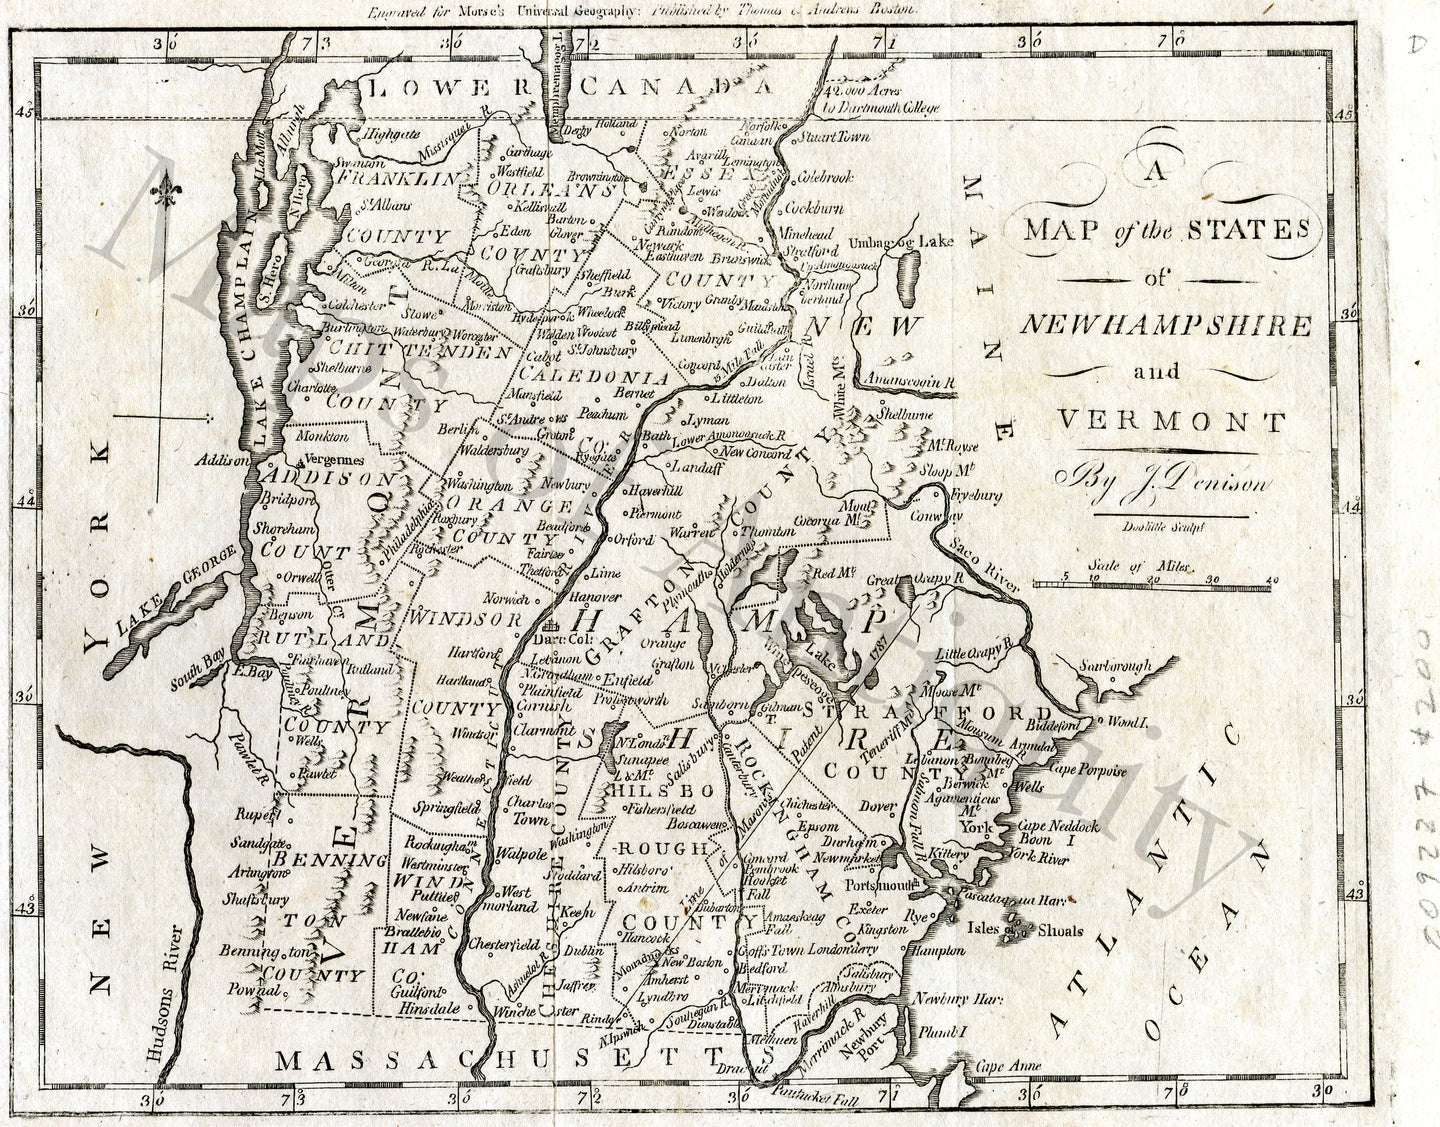 Black-and-White-Antique-Map-A-Map-of-the-States-of-New-Hampshire-and-Vermont-by-J.-Denison-New-Hampshire-Vermont-1796-Jedidiah-Morse/Doolittle-Maps-Of-Antiquity